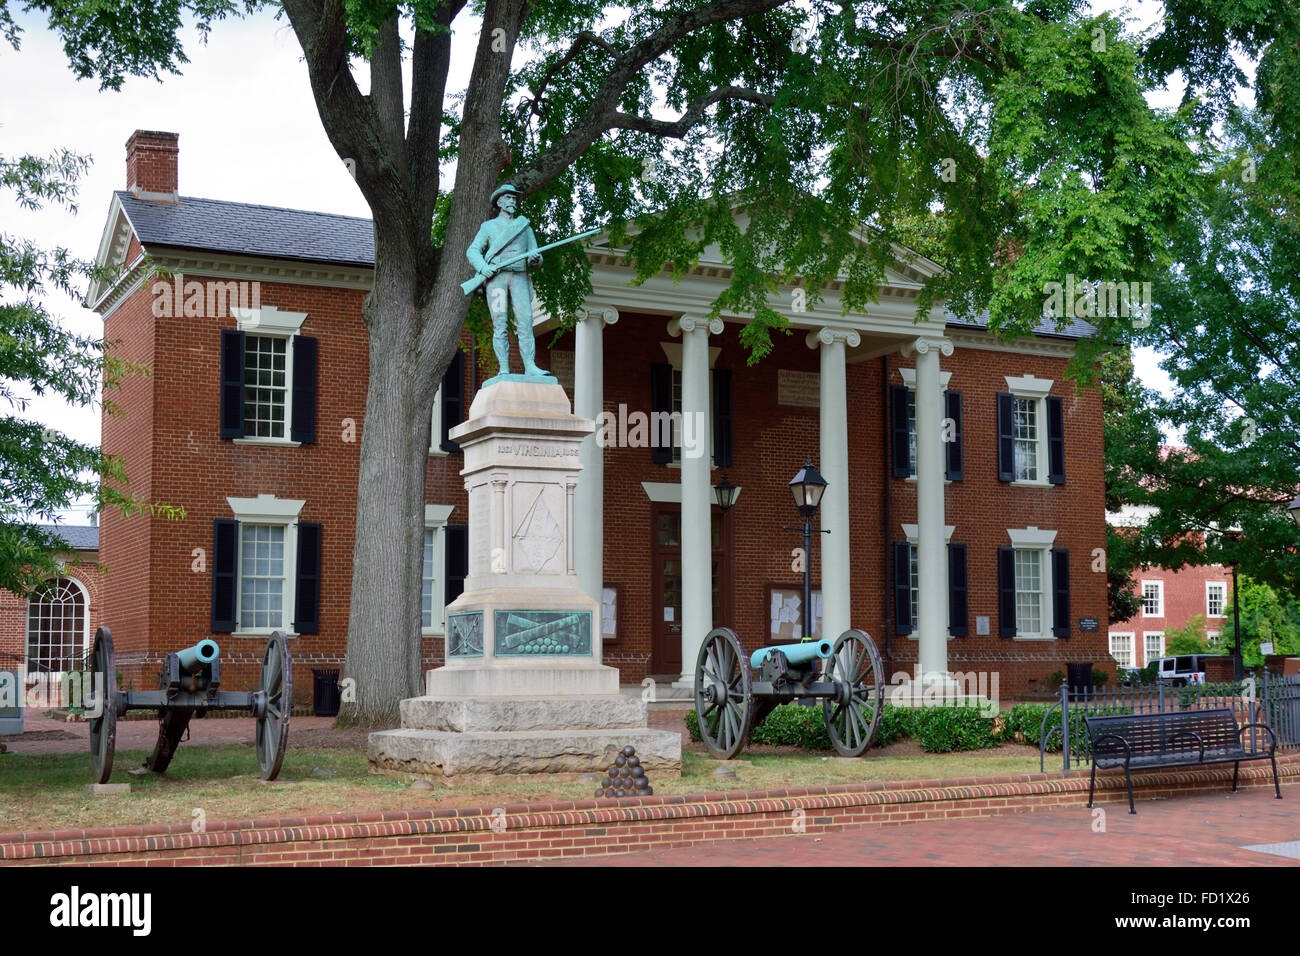 Albemarle County Courthouse, Charlottesville Banque D'Images